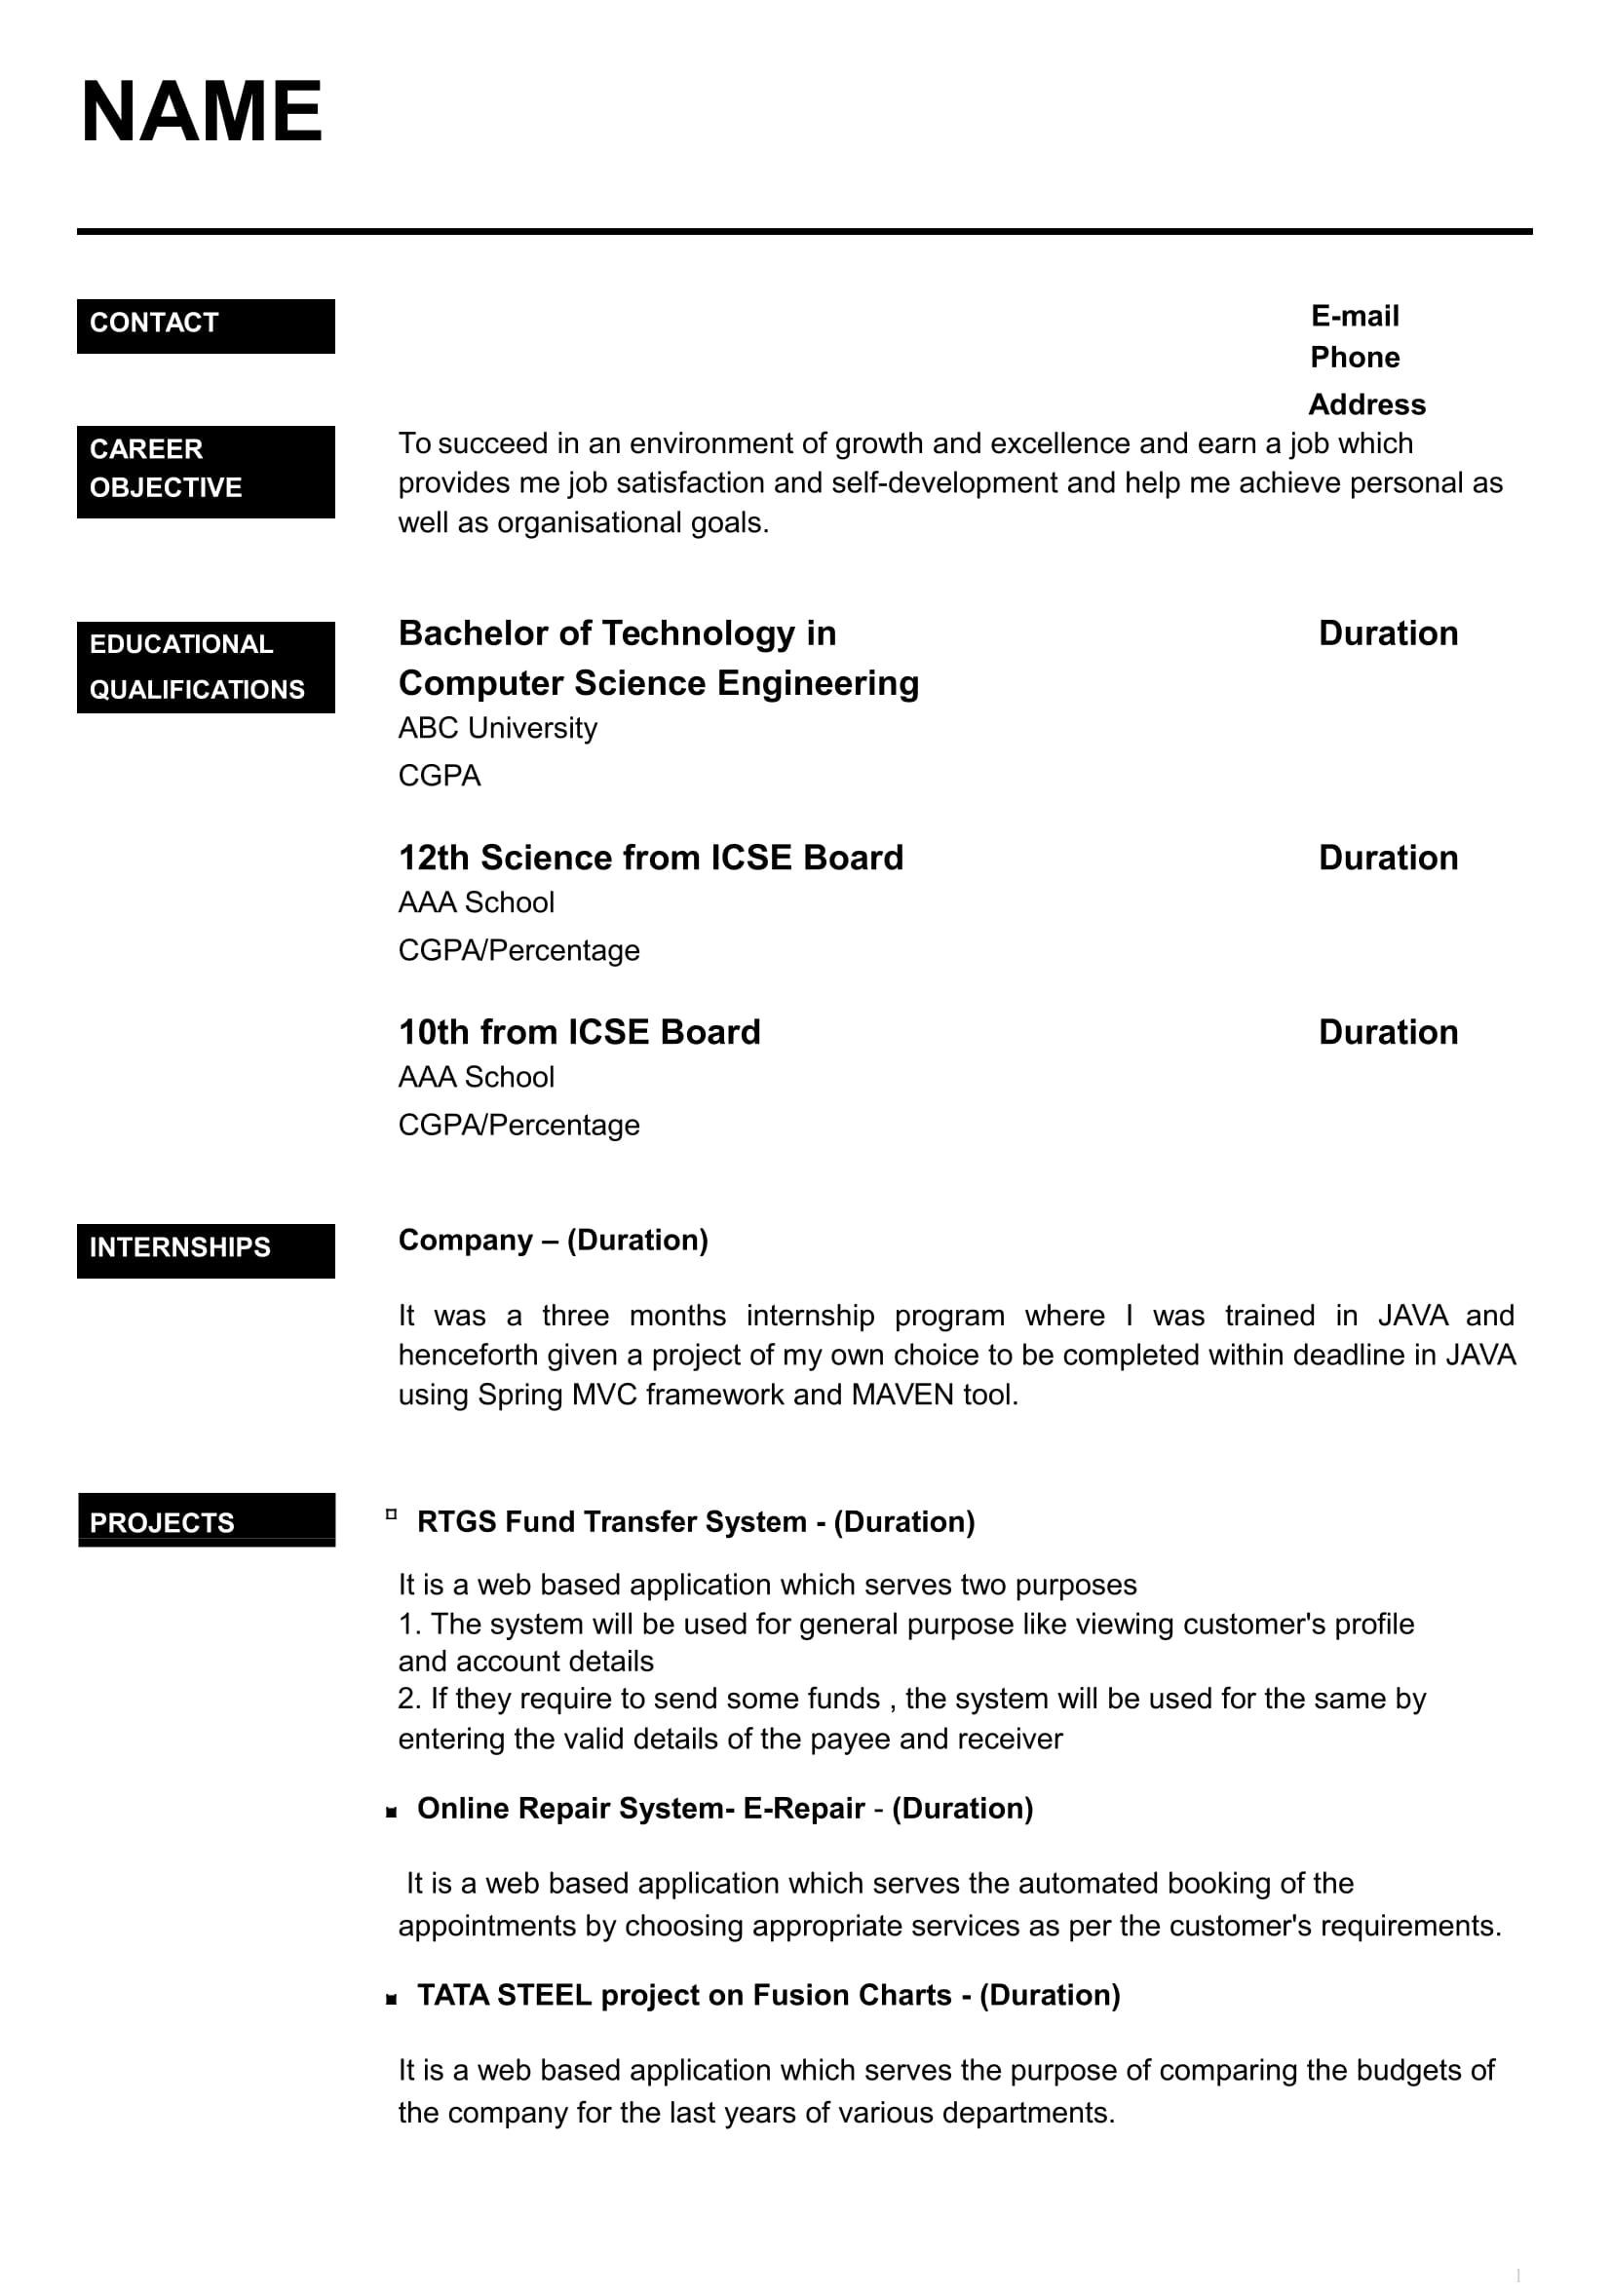 Sample Resume for Freshers Engineers Computer Science Download Cv for Freshers In Word – ‘google à¤¸à¤°à¥à¤’ Best Resume format …